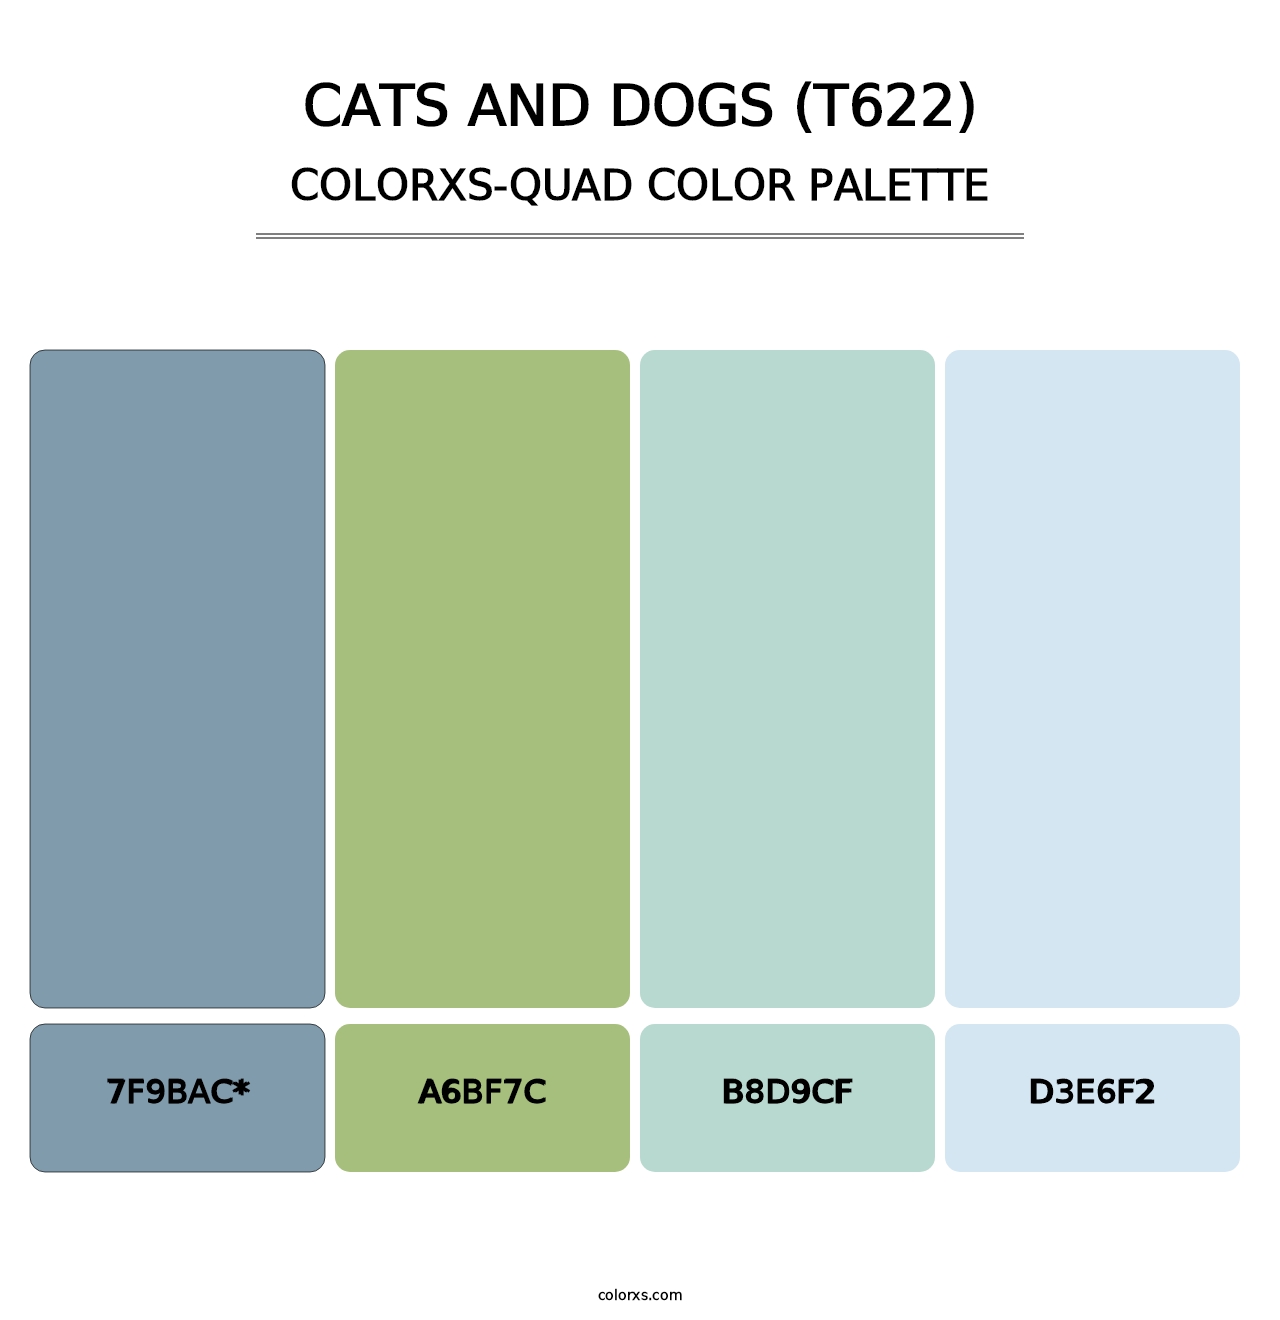 Cats and Dogs (T622) - Colorxs Quad Palette